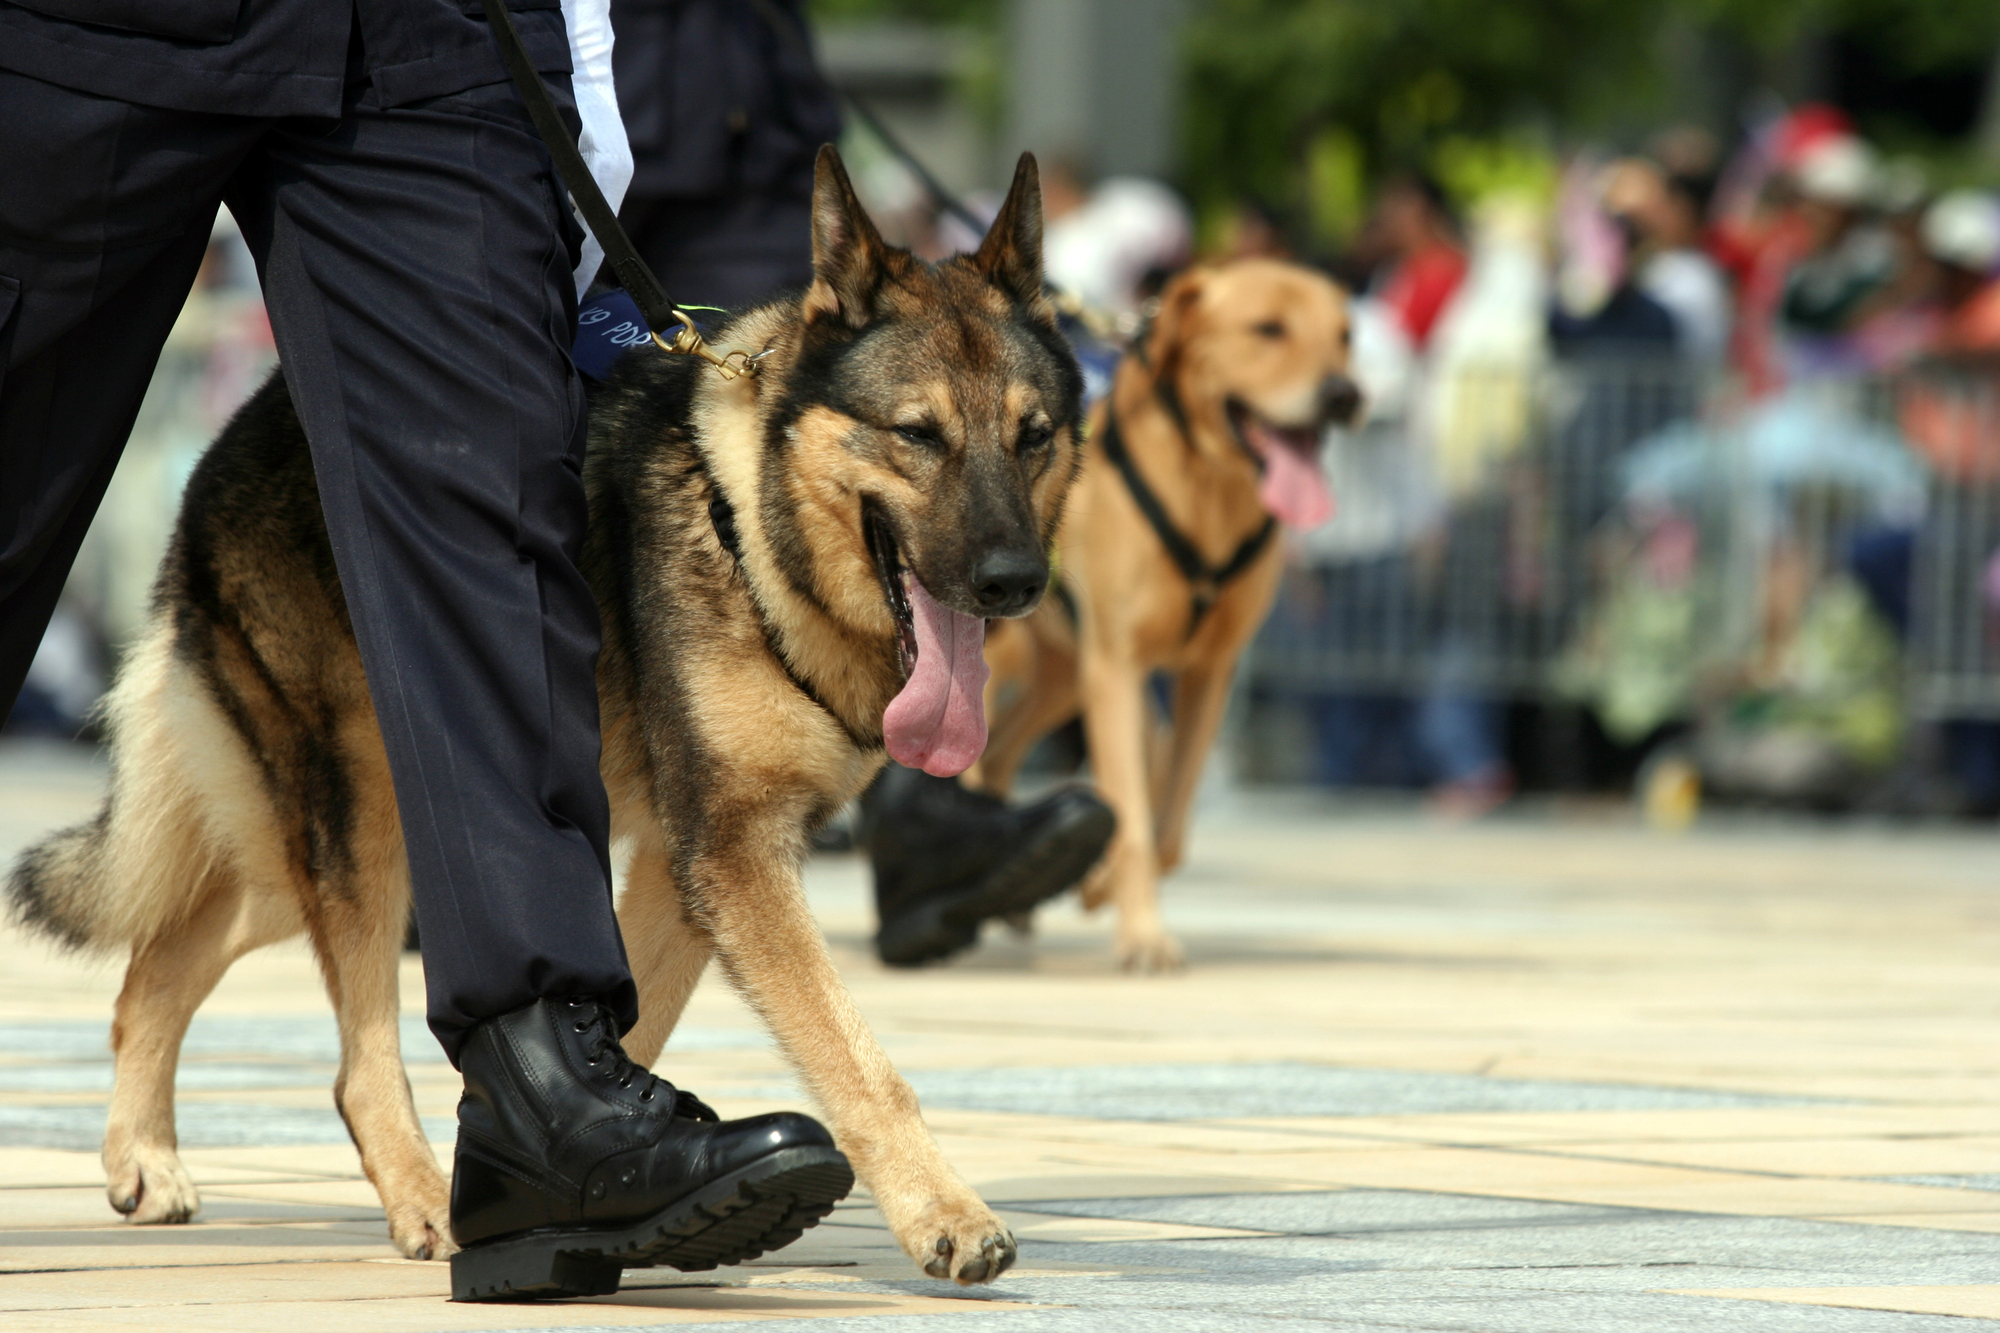 A trained German Shepherd protection dog walking alongside a security officer, with another canine team in the background